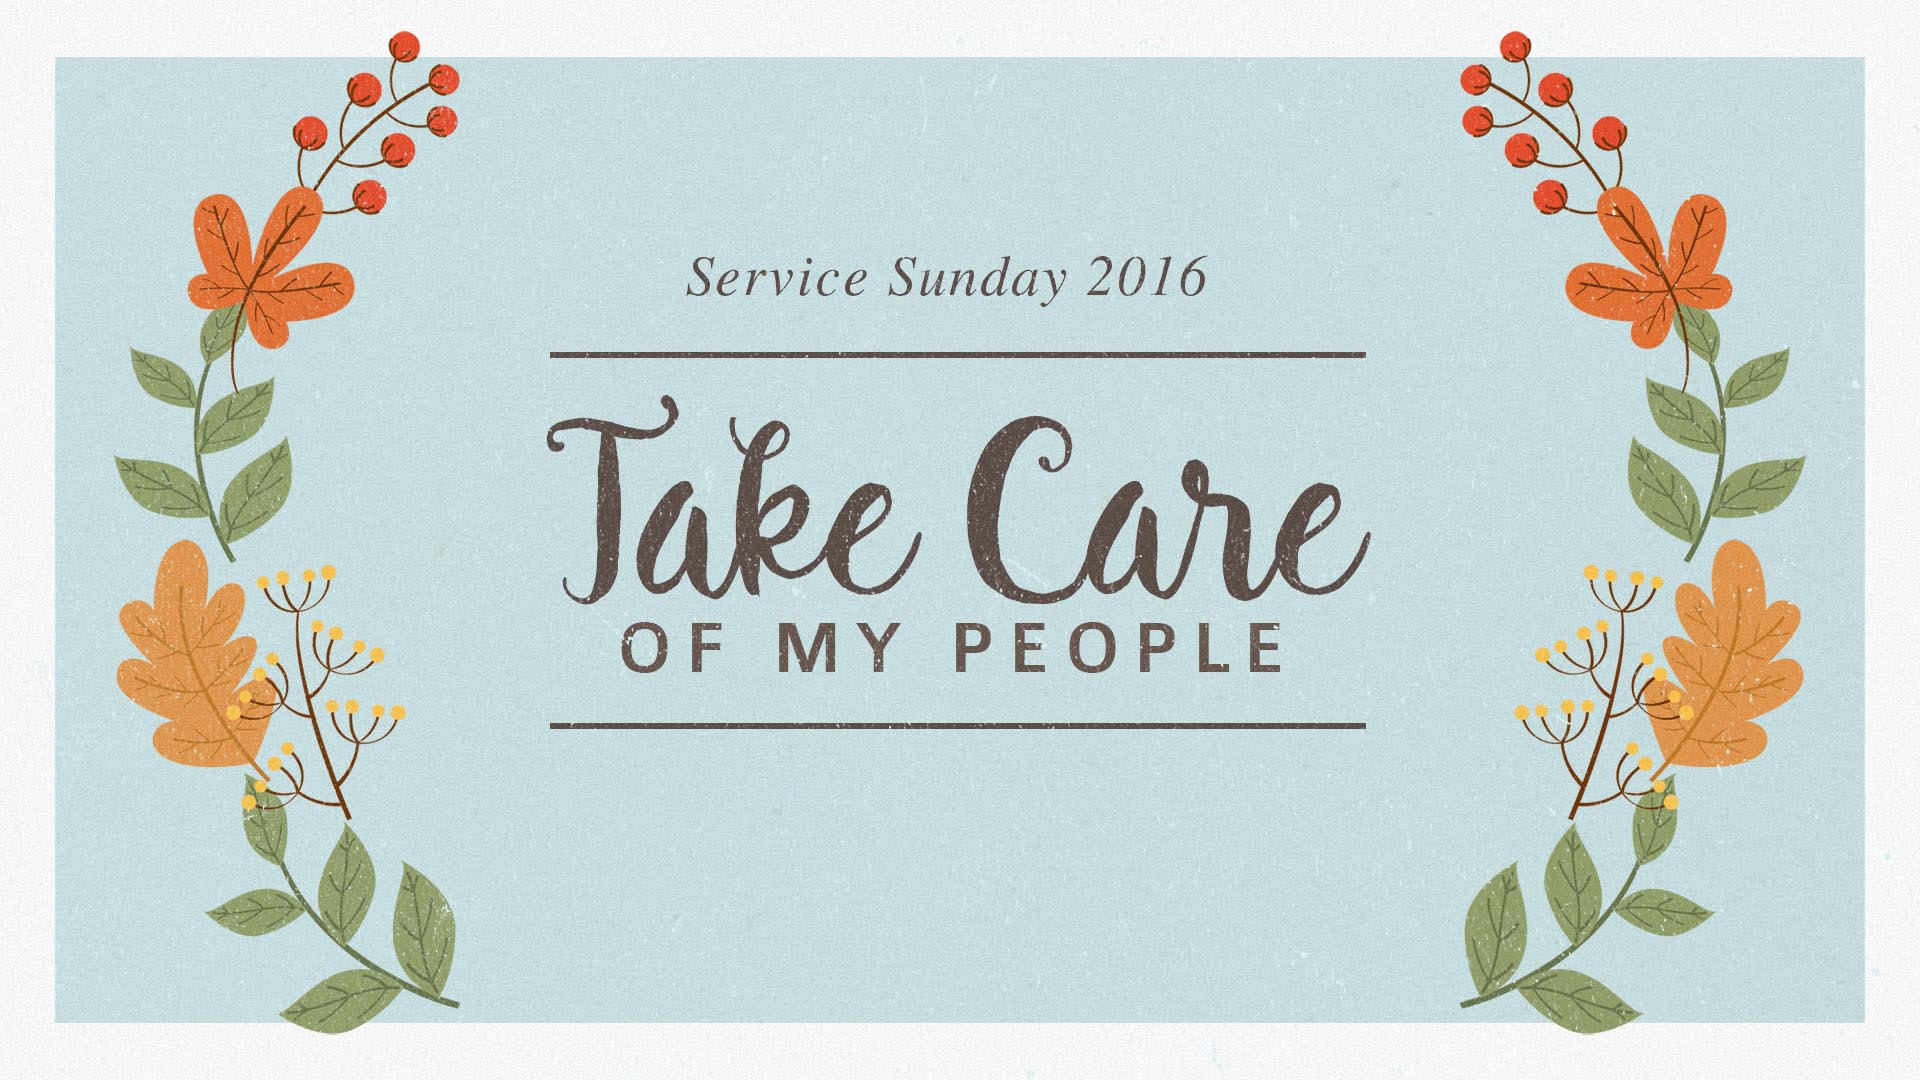 "Take Care Of My People: Service Sunday 2016" Message